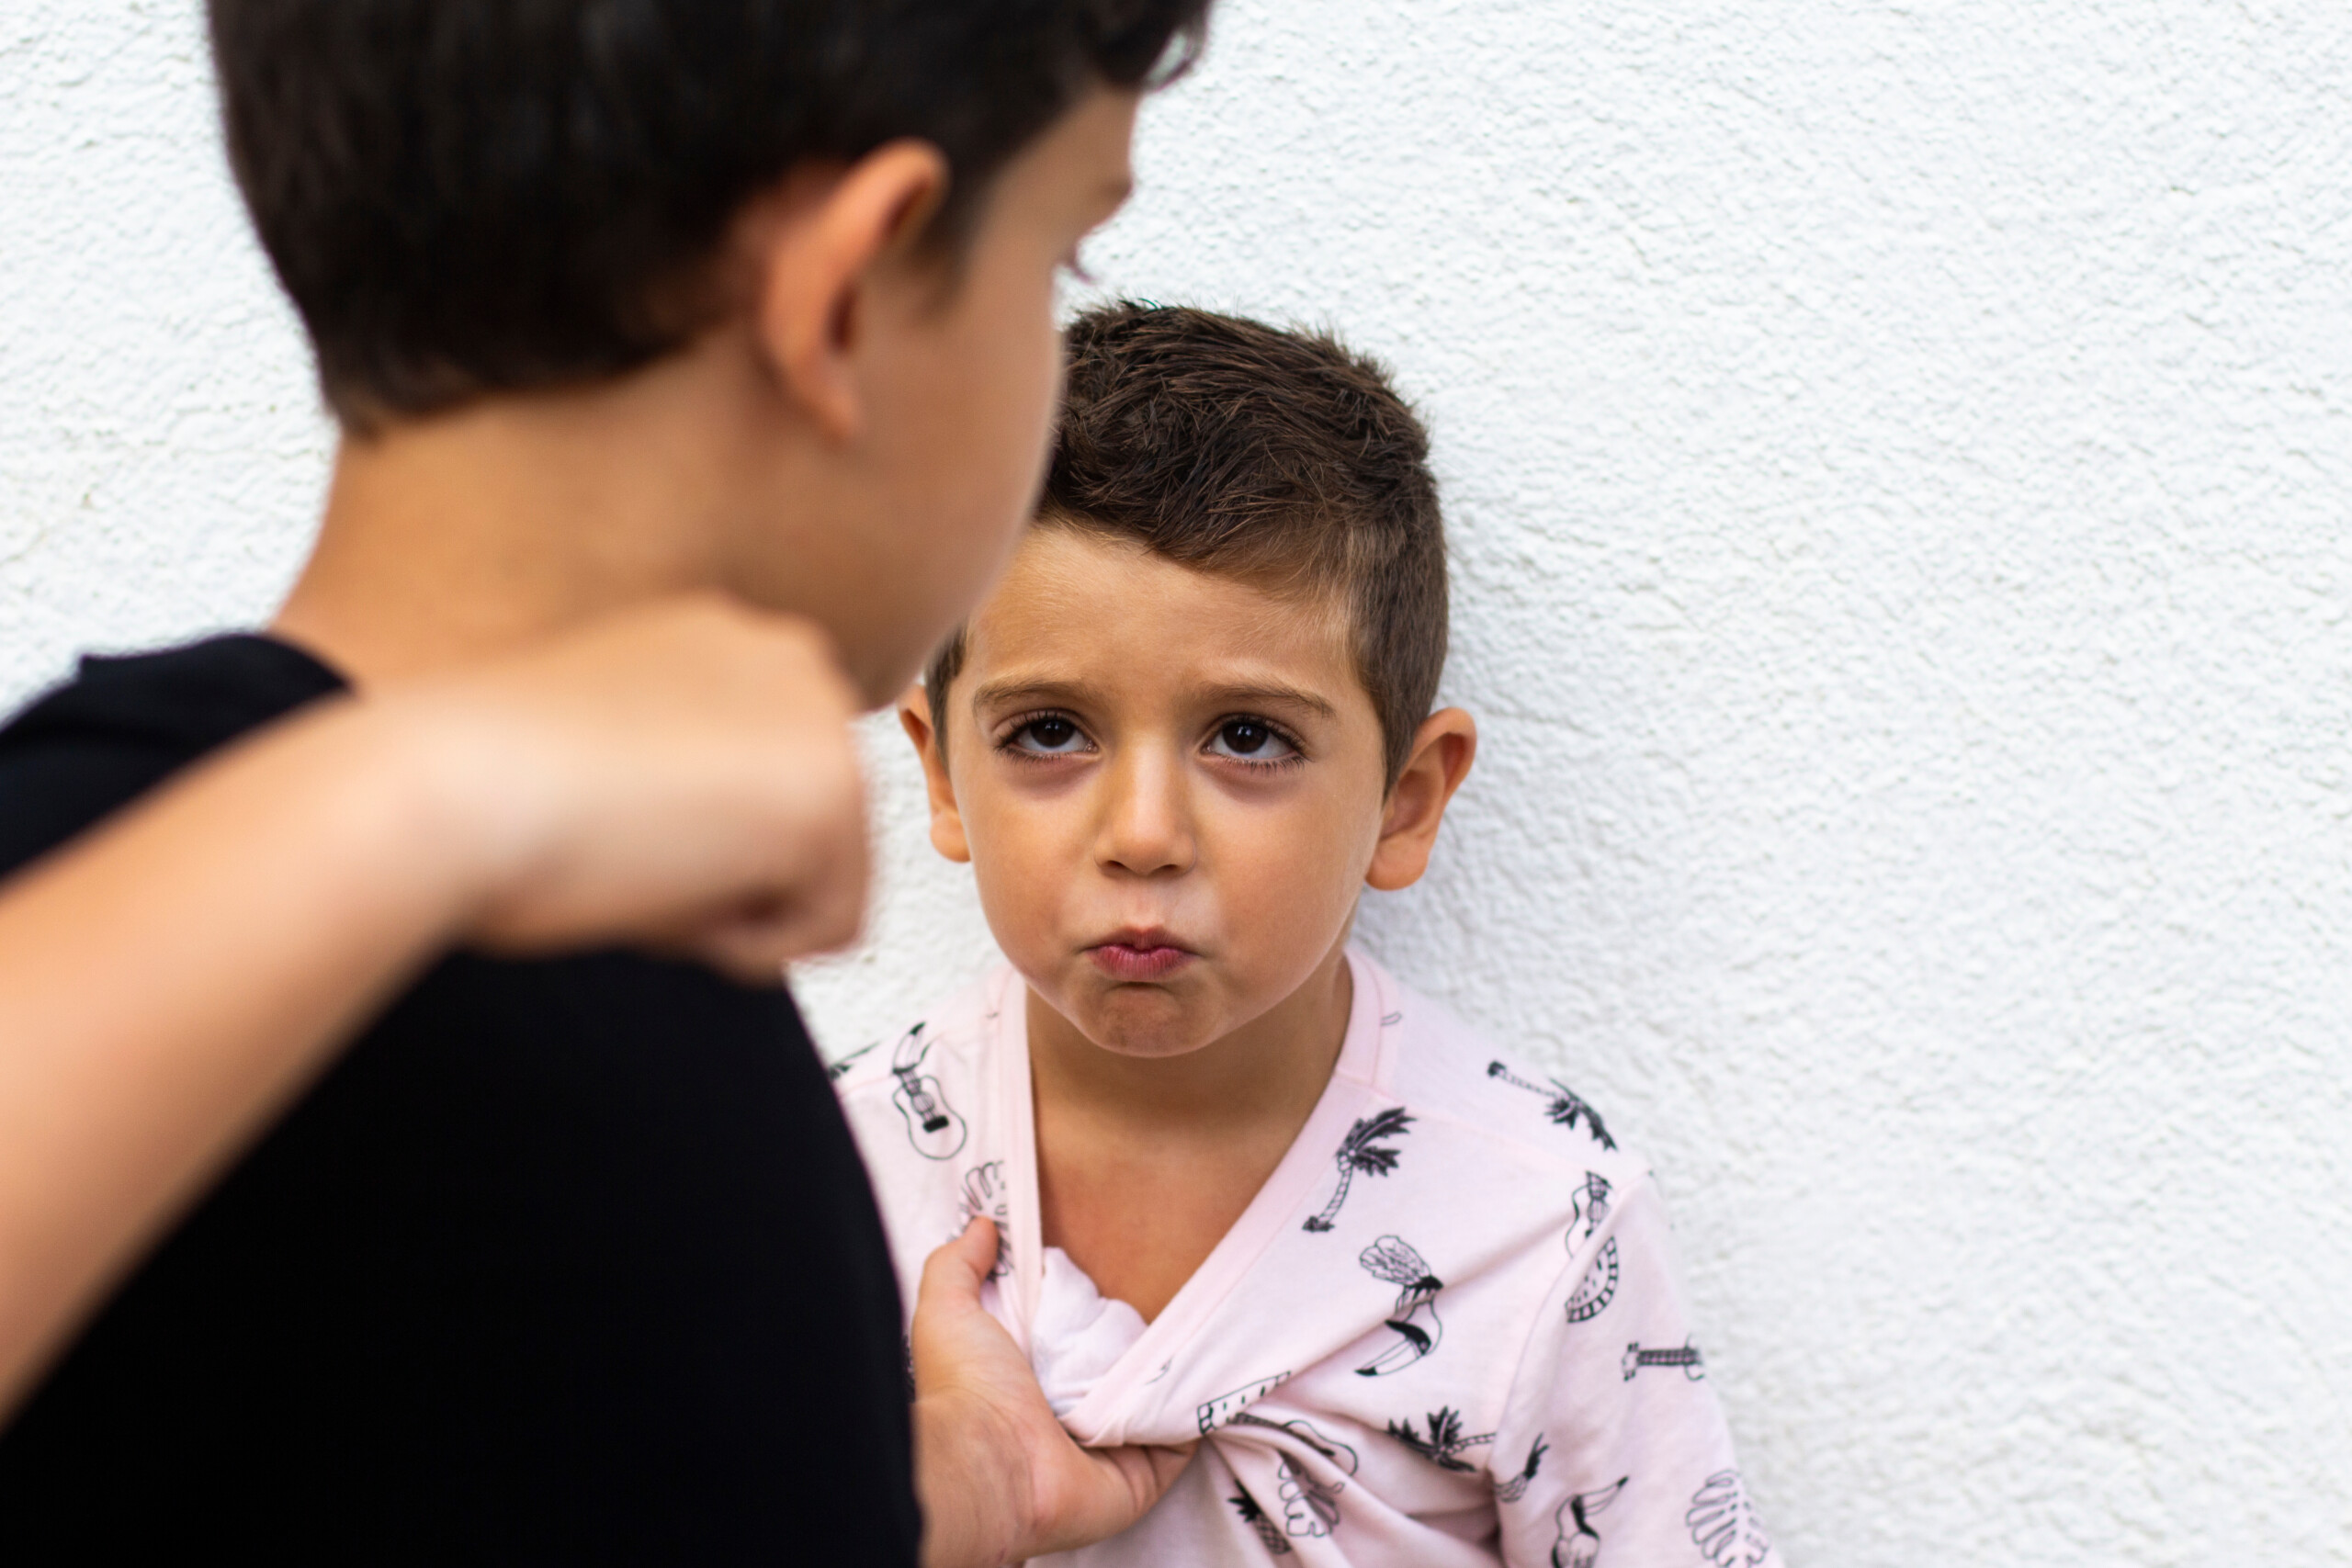 Child Bullying Younger Sibling How Mom Should NEVER